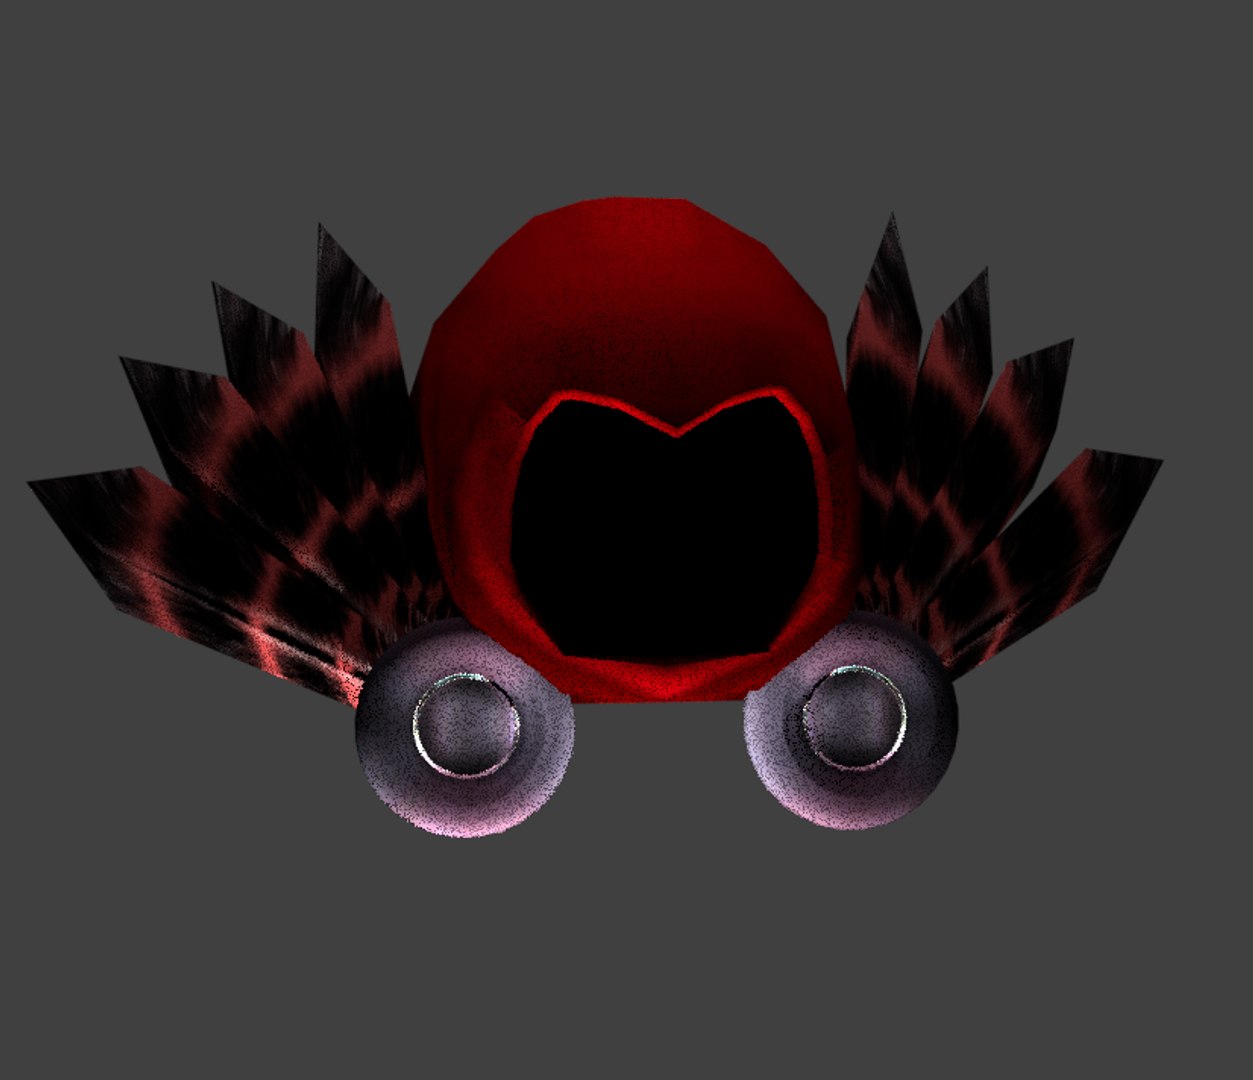 First Dominus! - Roblox